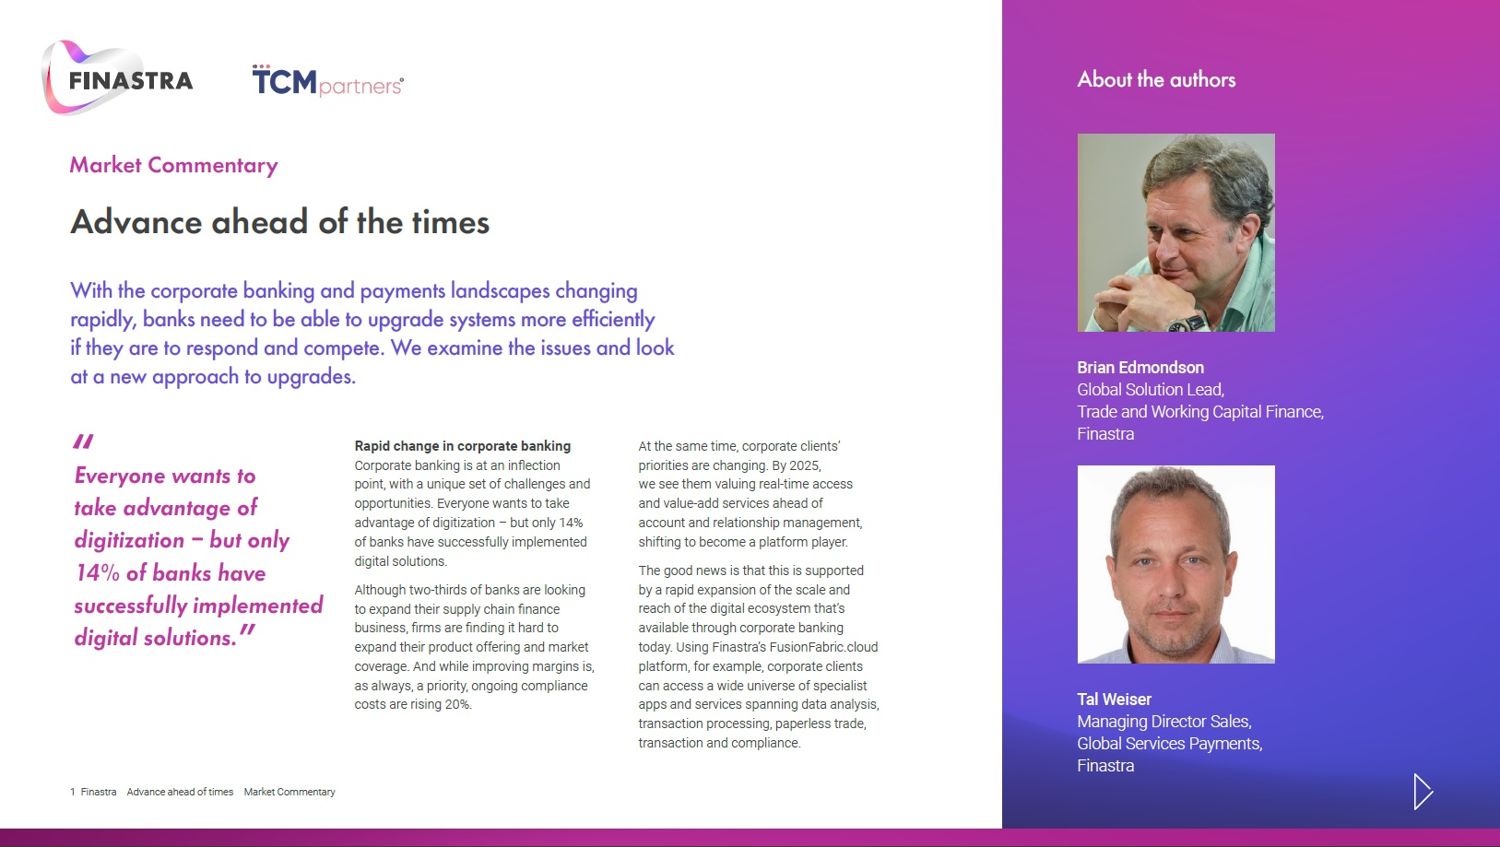 Advantages of digitization; increasing compliance costs; real-time access and value add services ahead of account and relationship management, shifting to become a platform player; payments transformation (ISO 20022, PSD2); Upgrades orientated towards business outcomes and data driven; reduce TCO; finastra fusionfabric.cloud. 